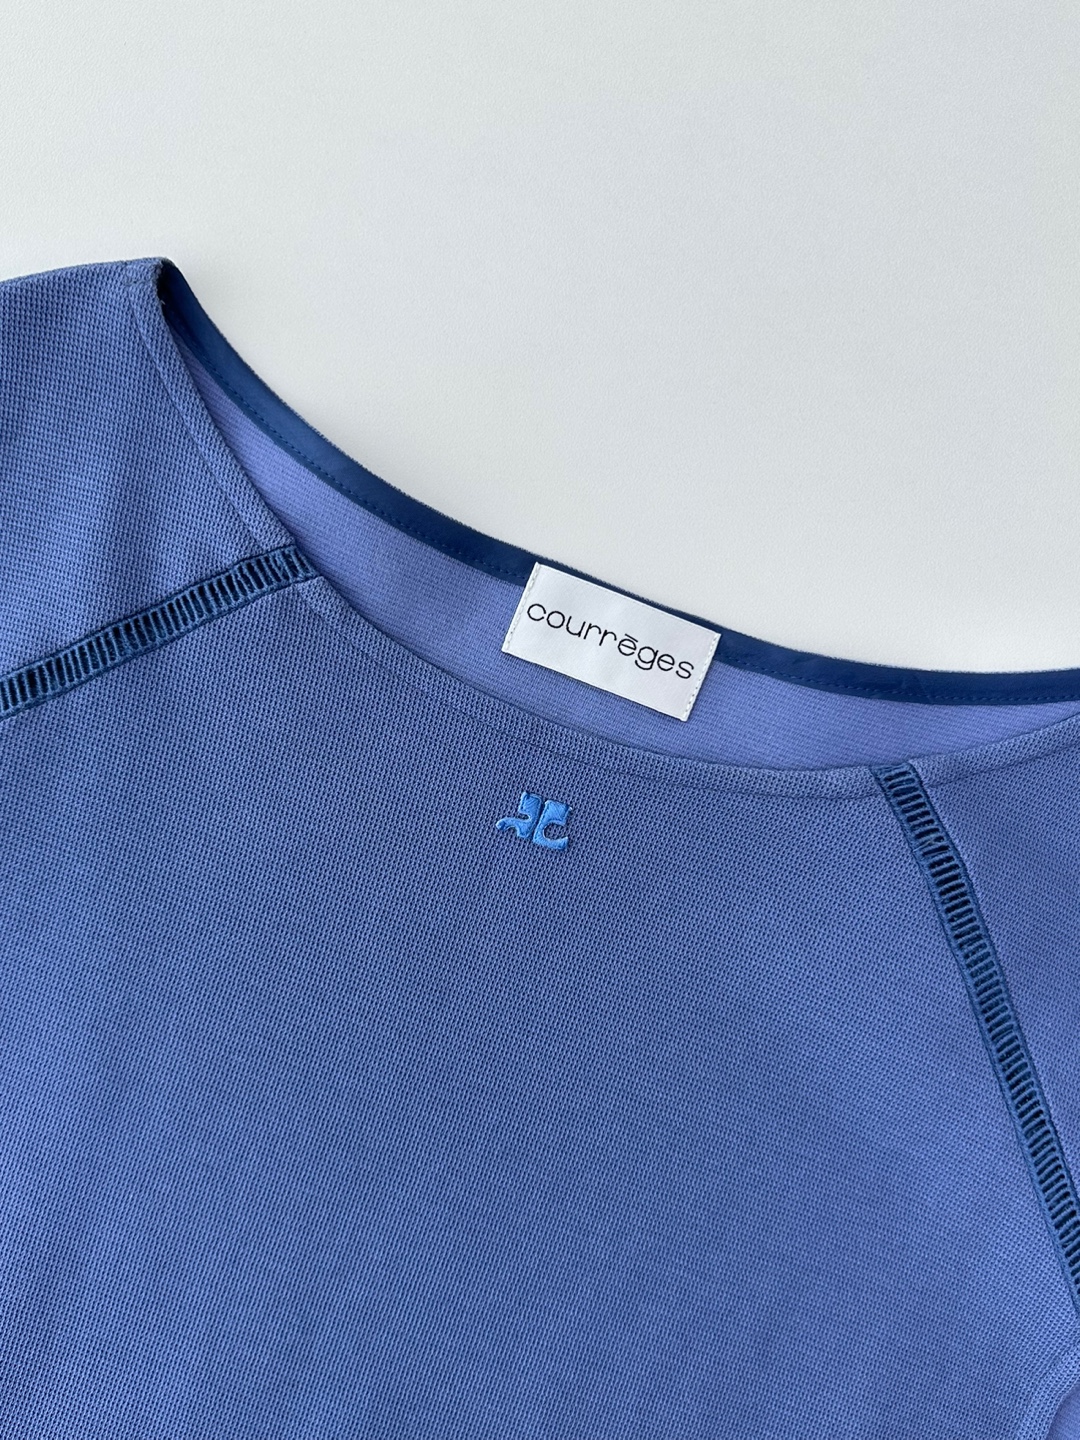 Courrèges Blue Punching Detail Span One Piece